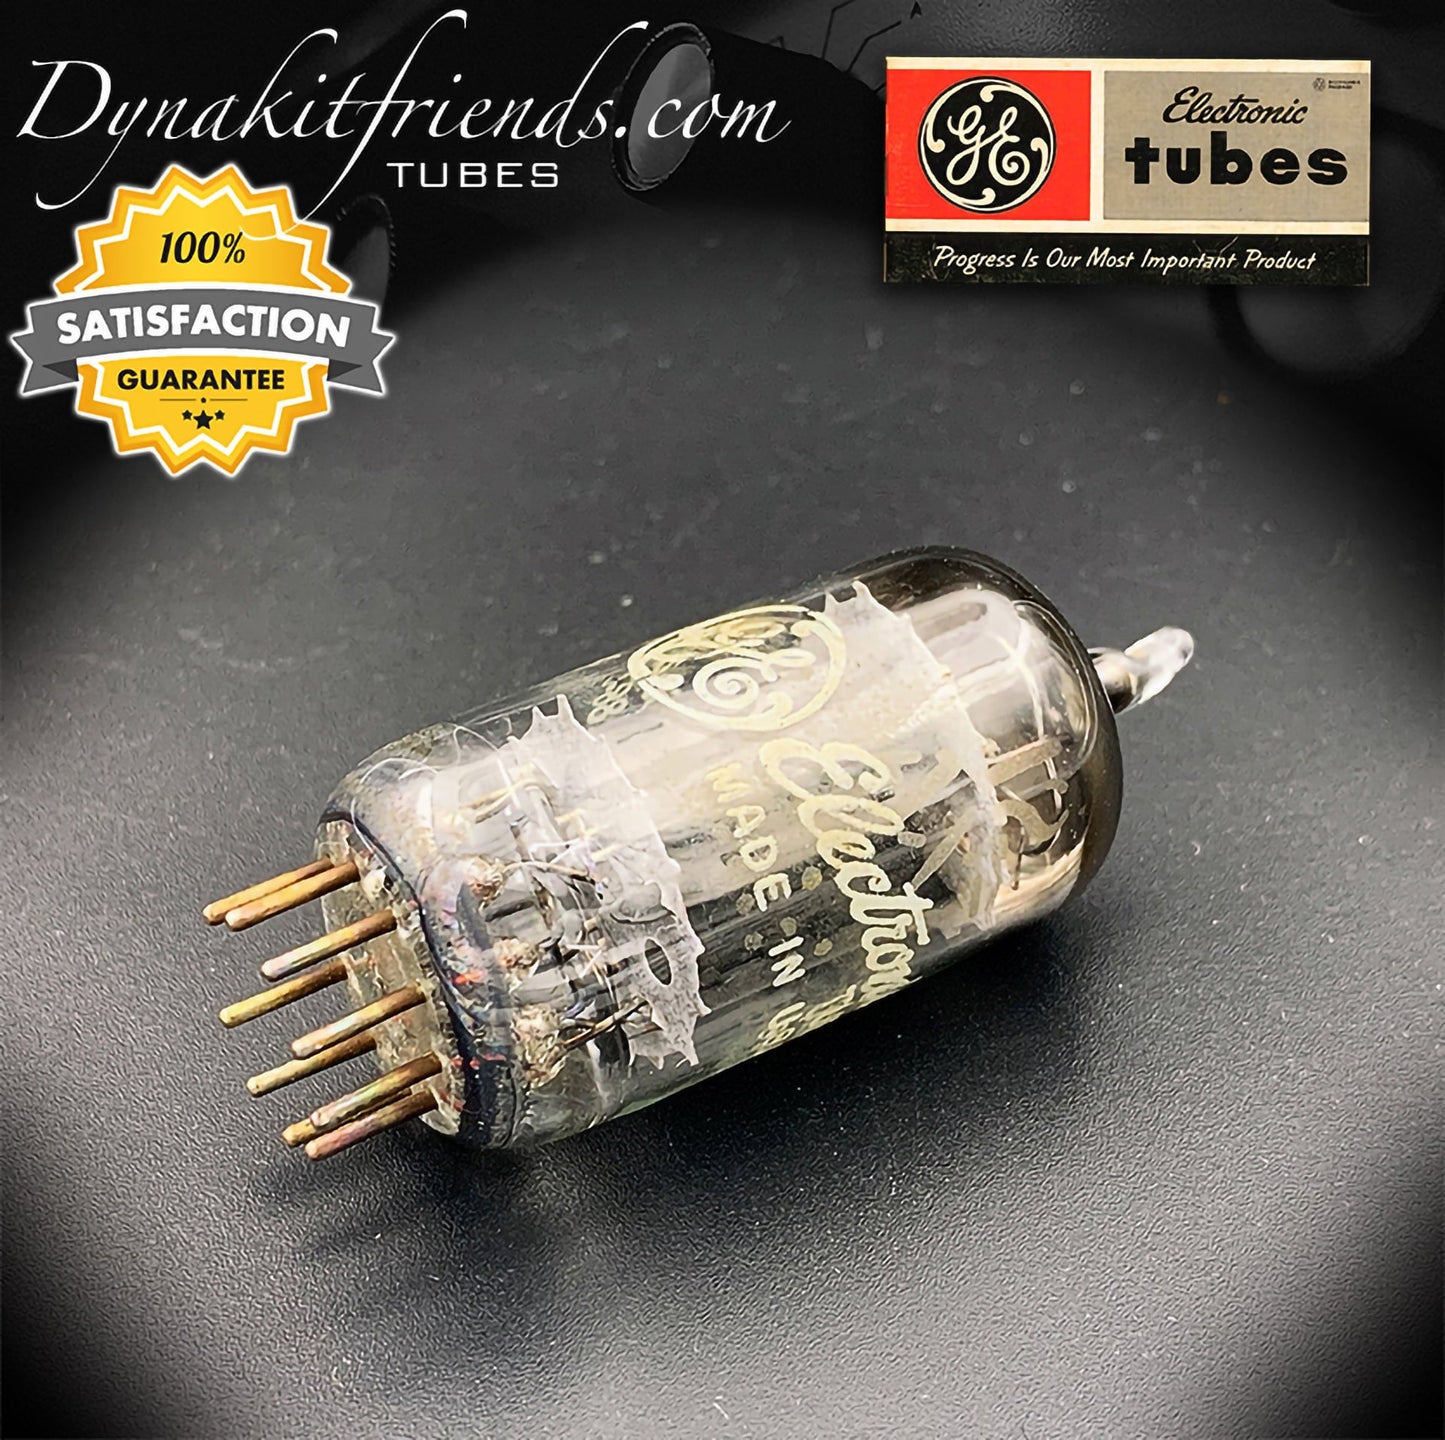 12AX7 ( ECC83 ) GE Long Gray Plates D Getter Tested Tubes MADE IN USA '60 - Vacuum Tubes Treasures